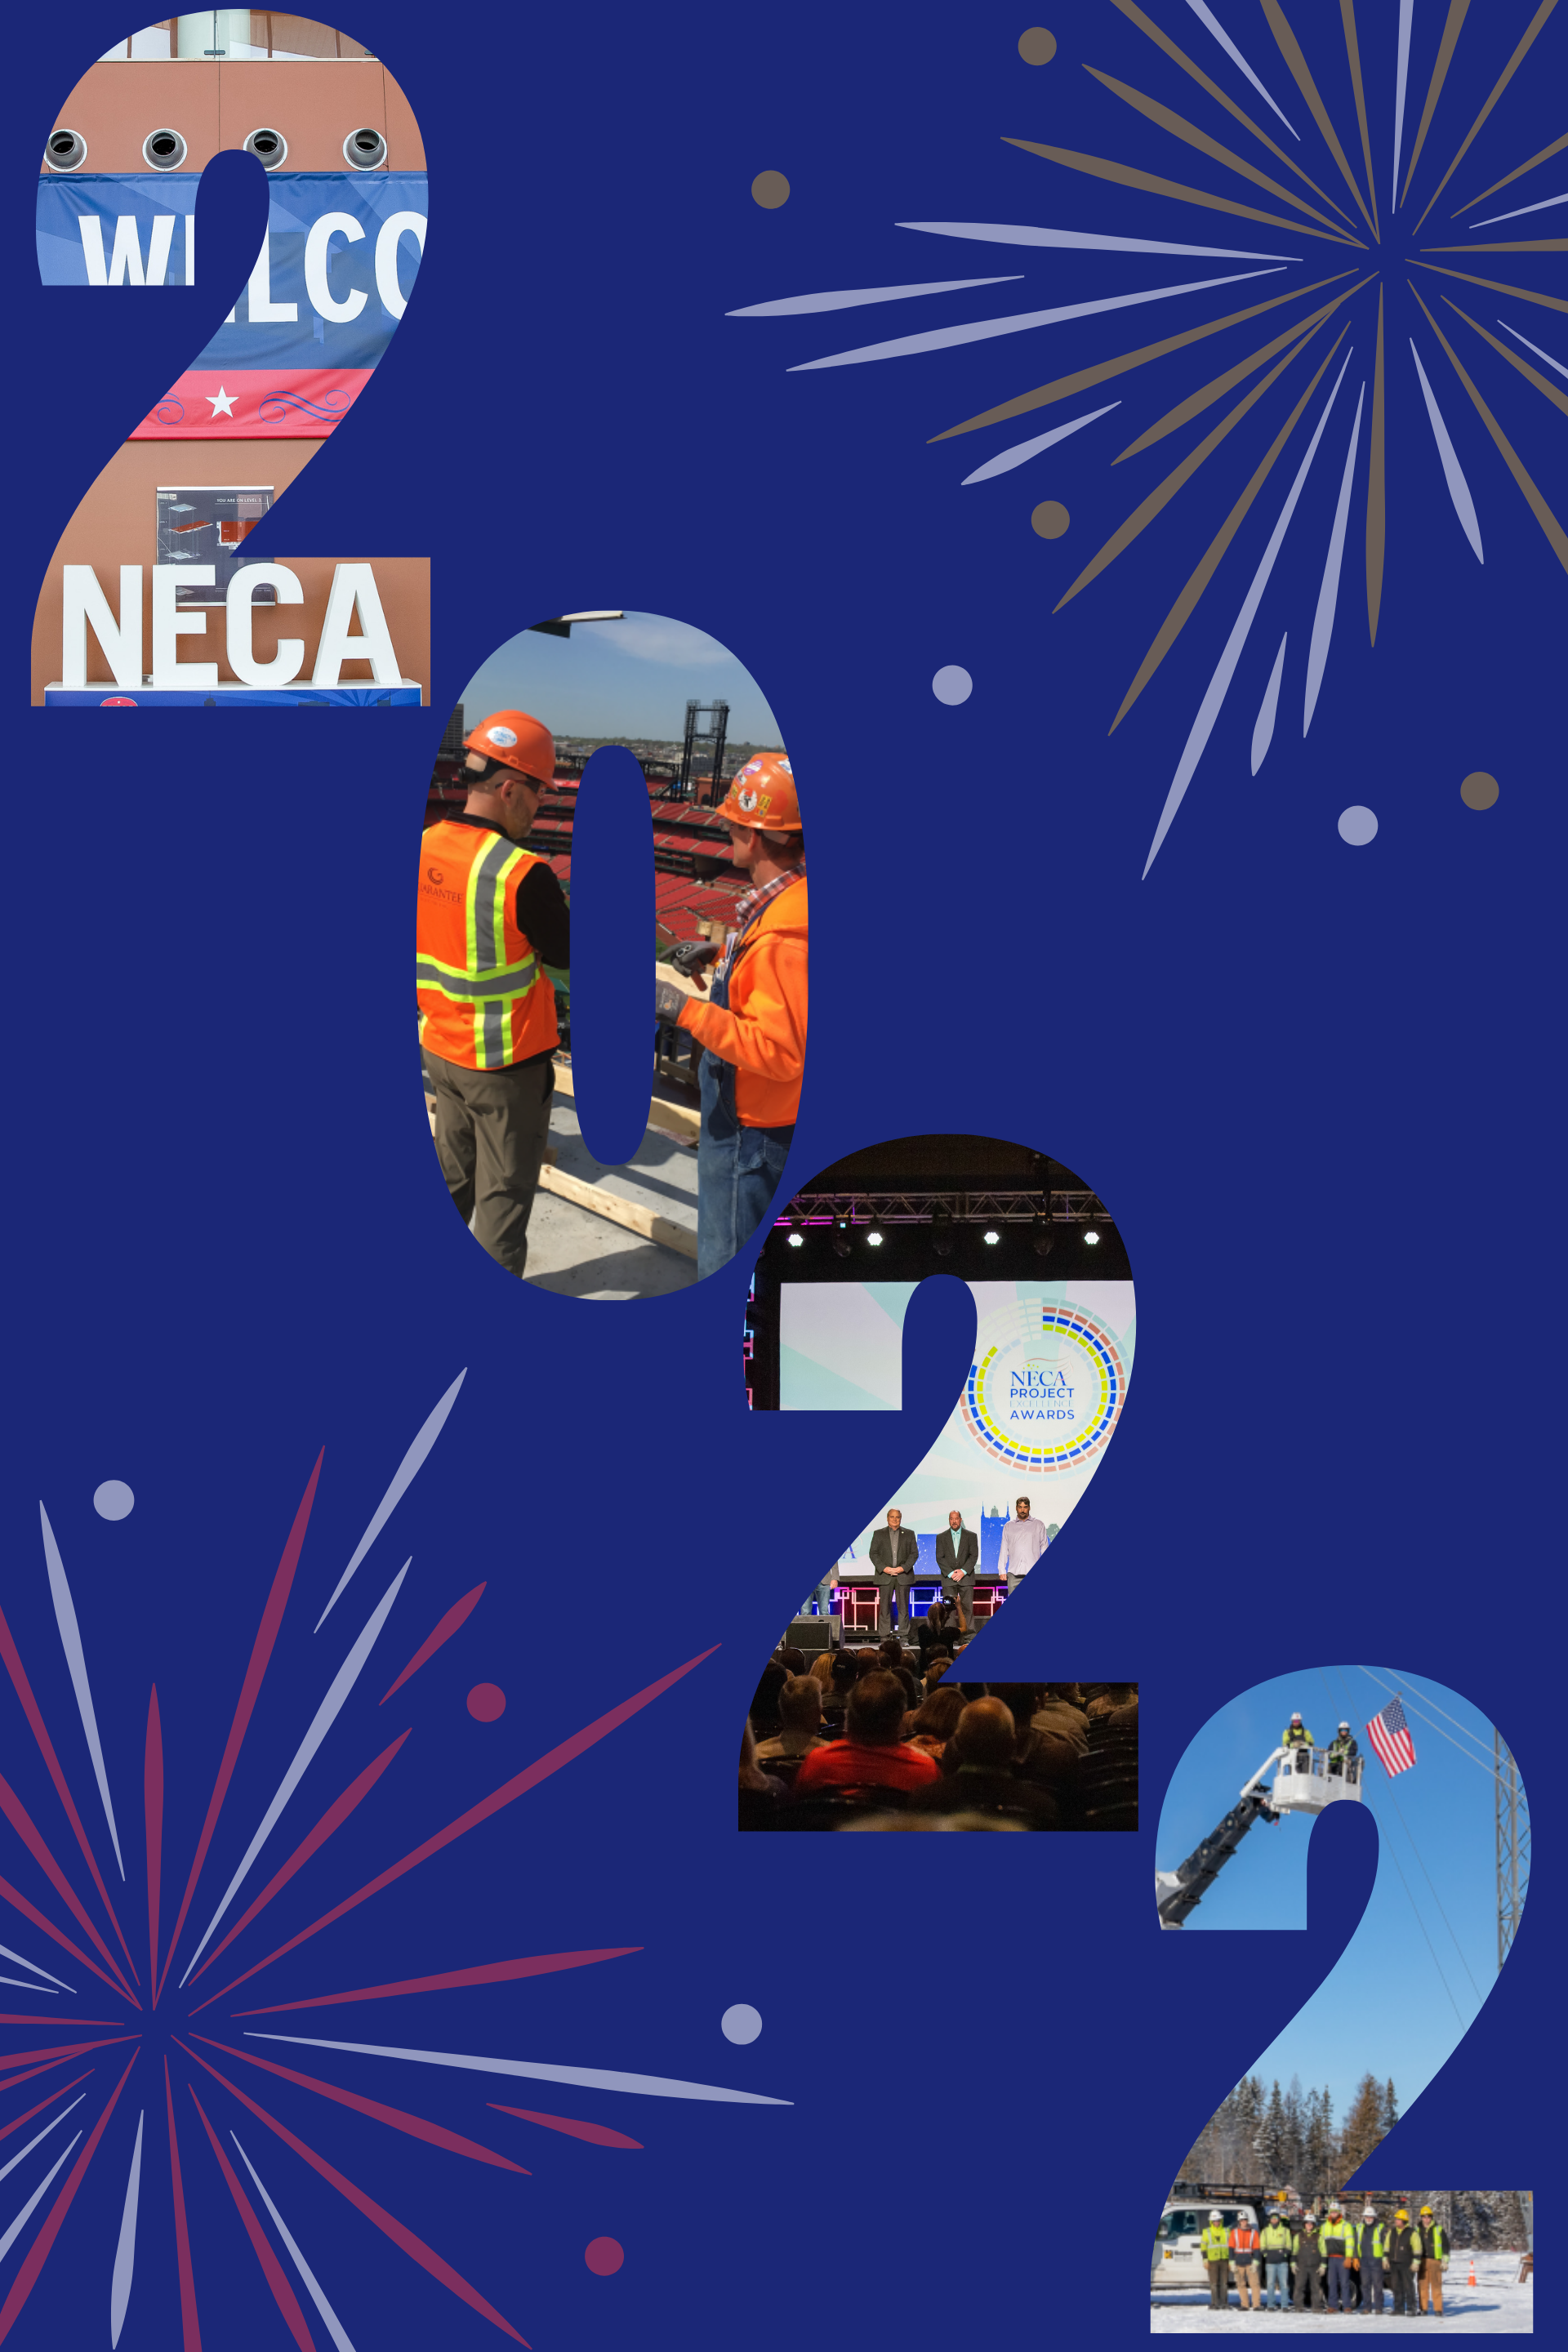 NECA Wishes You a Happy New Year